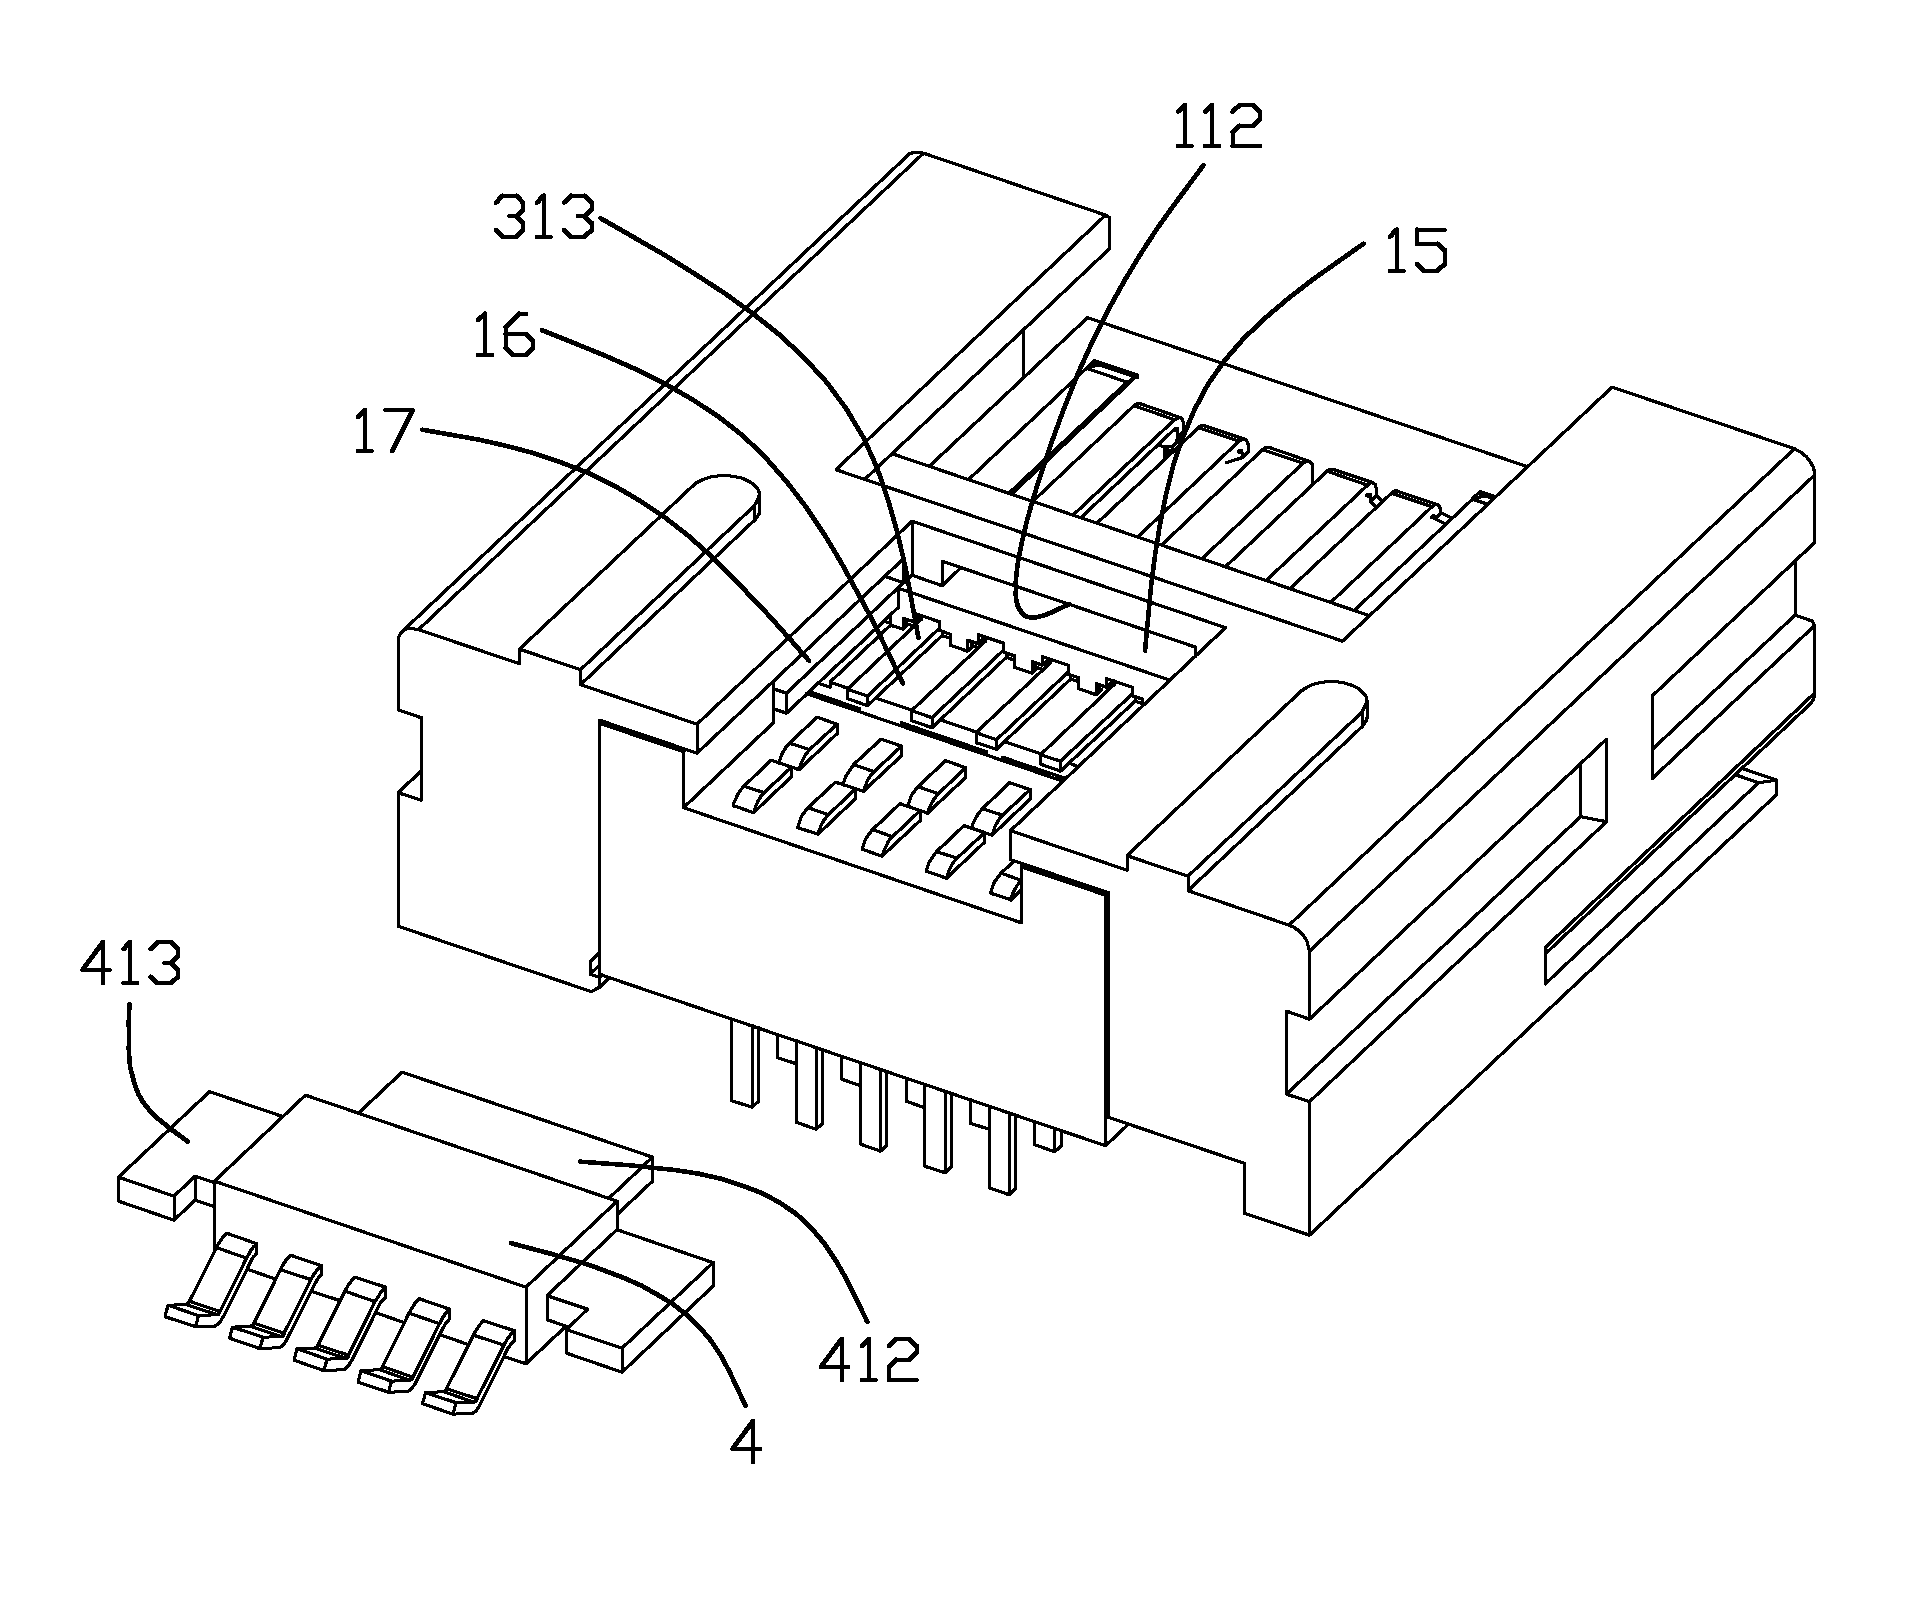 Receptacle connector having shuttle to selectively switch to different interfaces